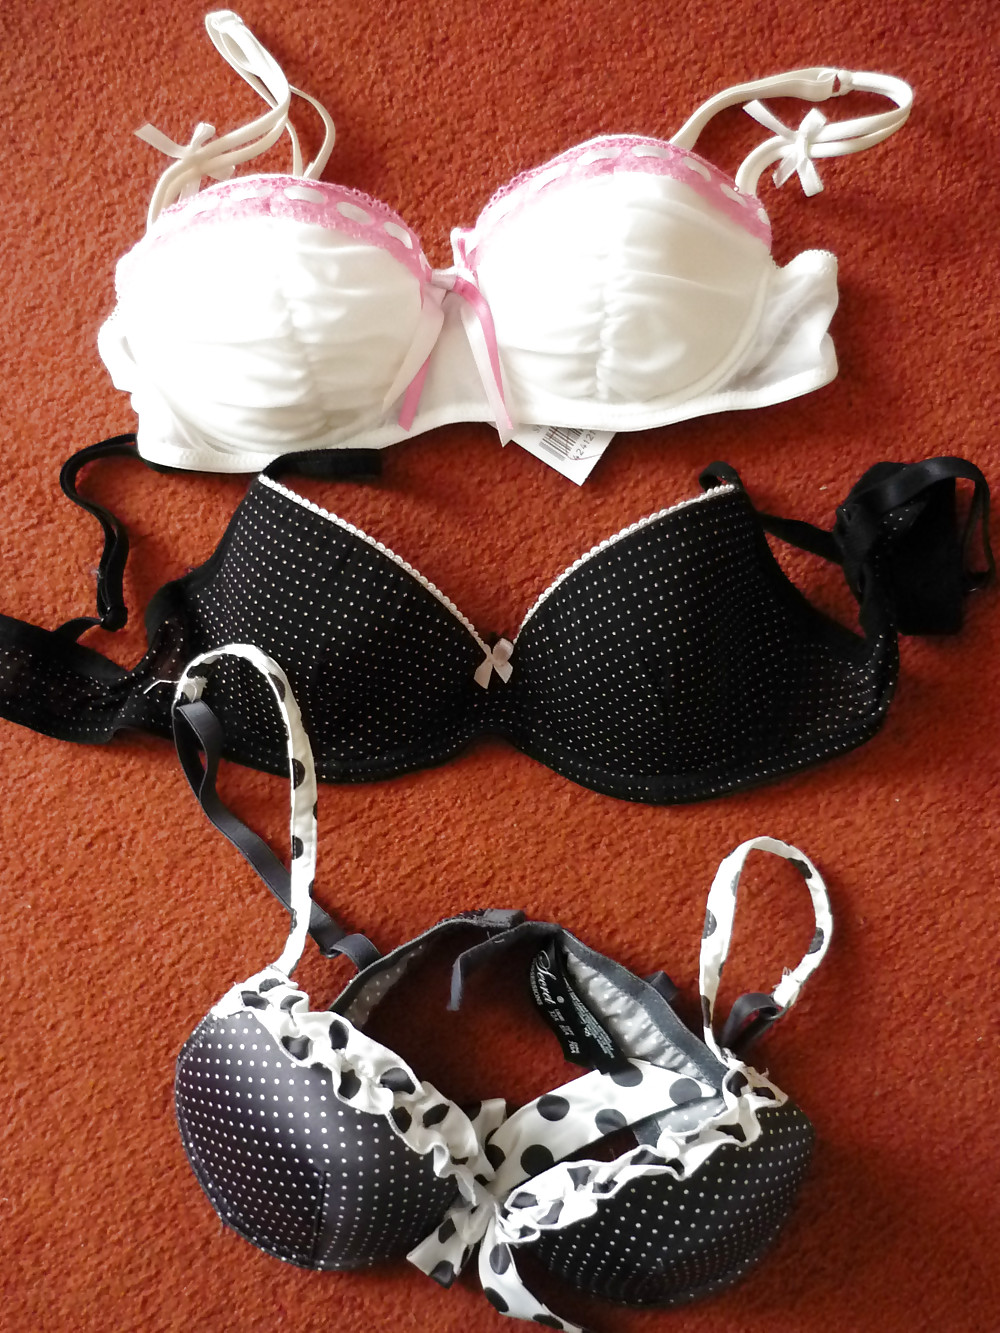 A Cup girls and bras 3 #14542584